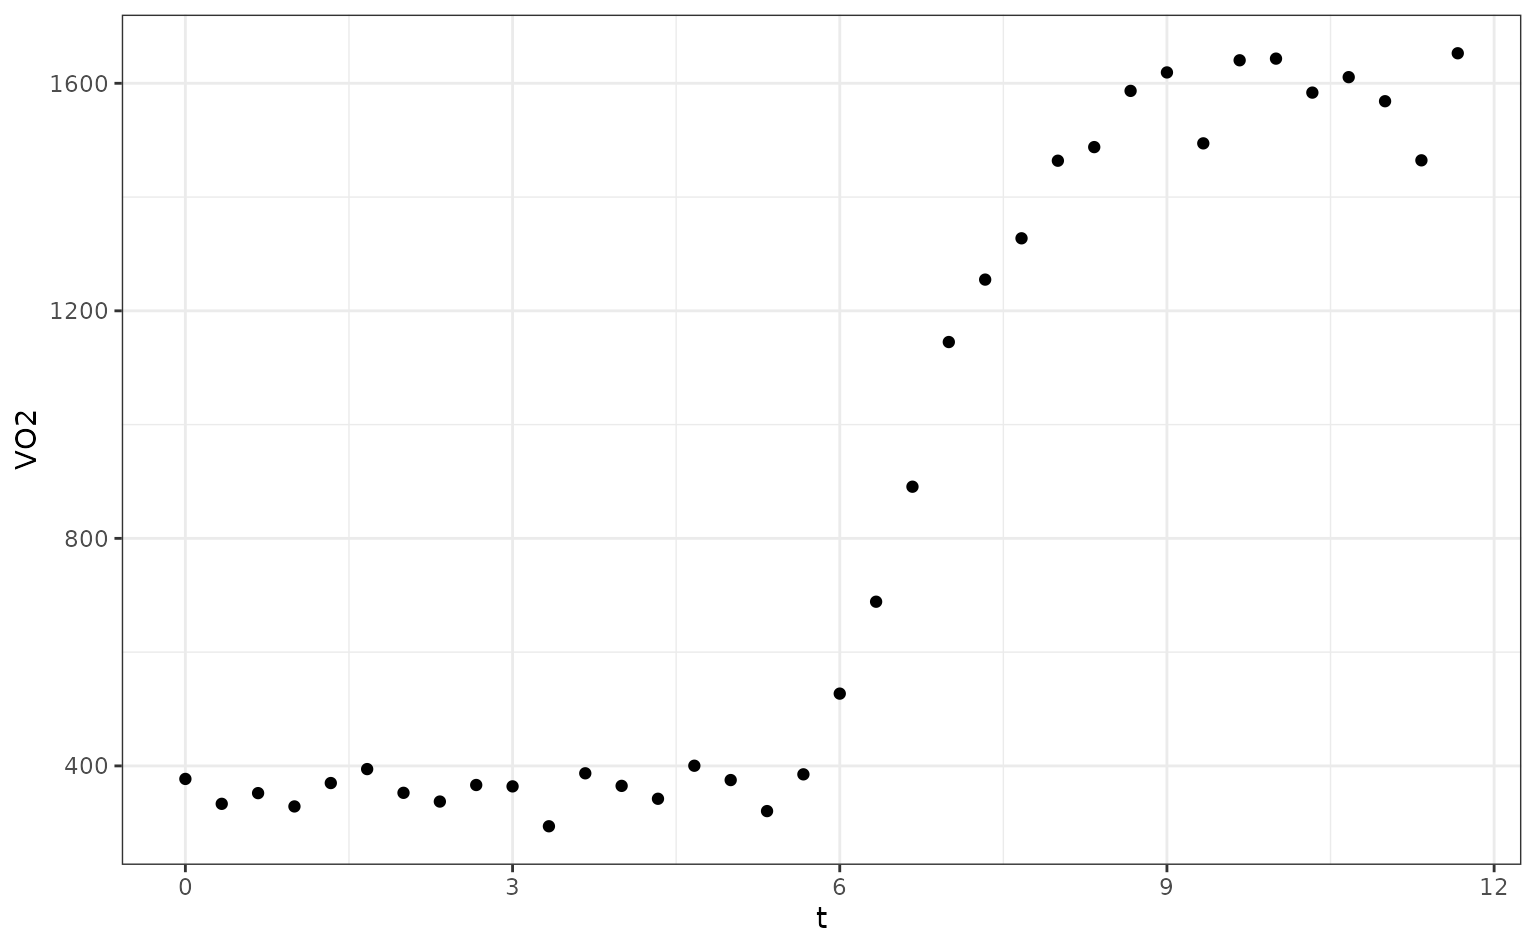 A scatterplot with time on the x-axis and oxygen uptake on the y-axis. For time < 6, the oxygen uptake remains at around 400. Between time = 6 and time = 9, it rises to about 1600, then remains around that value.